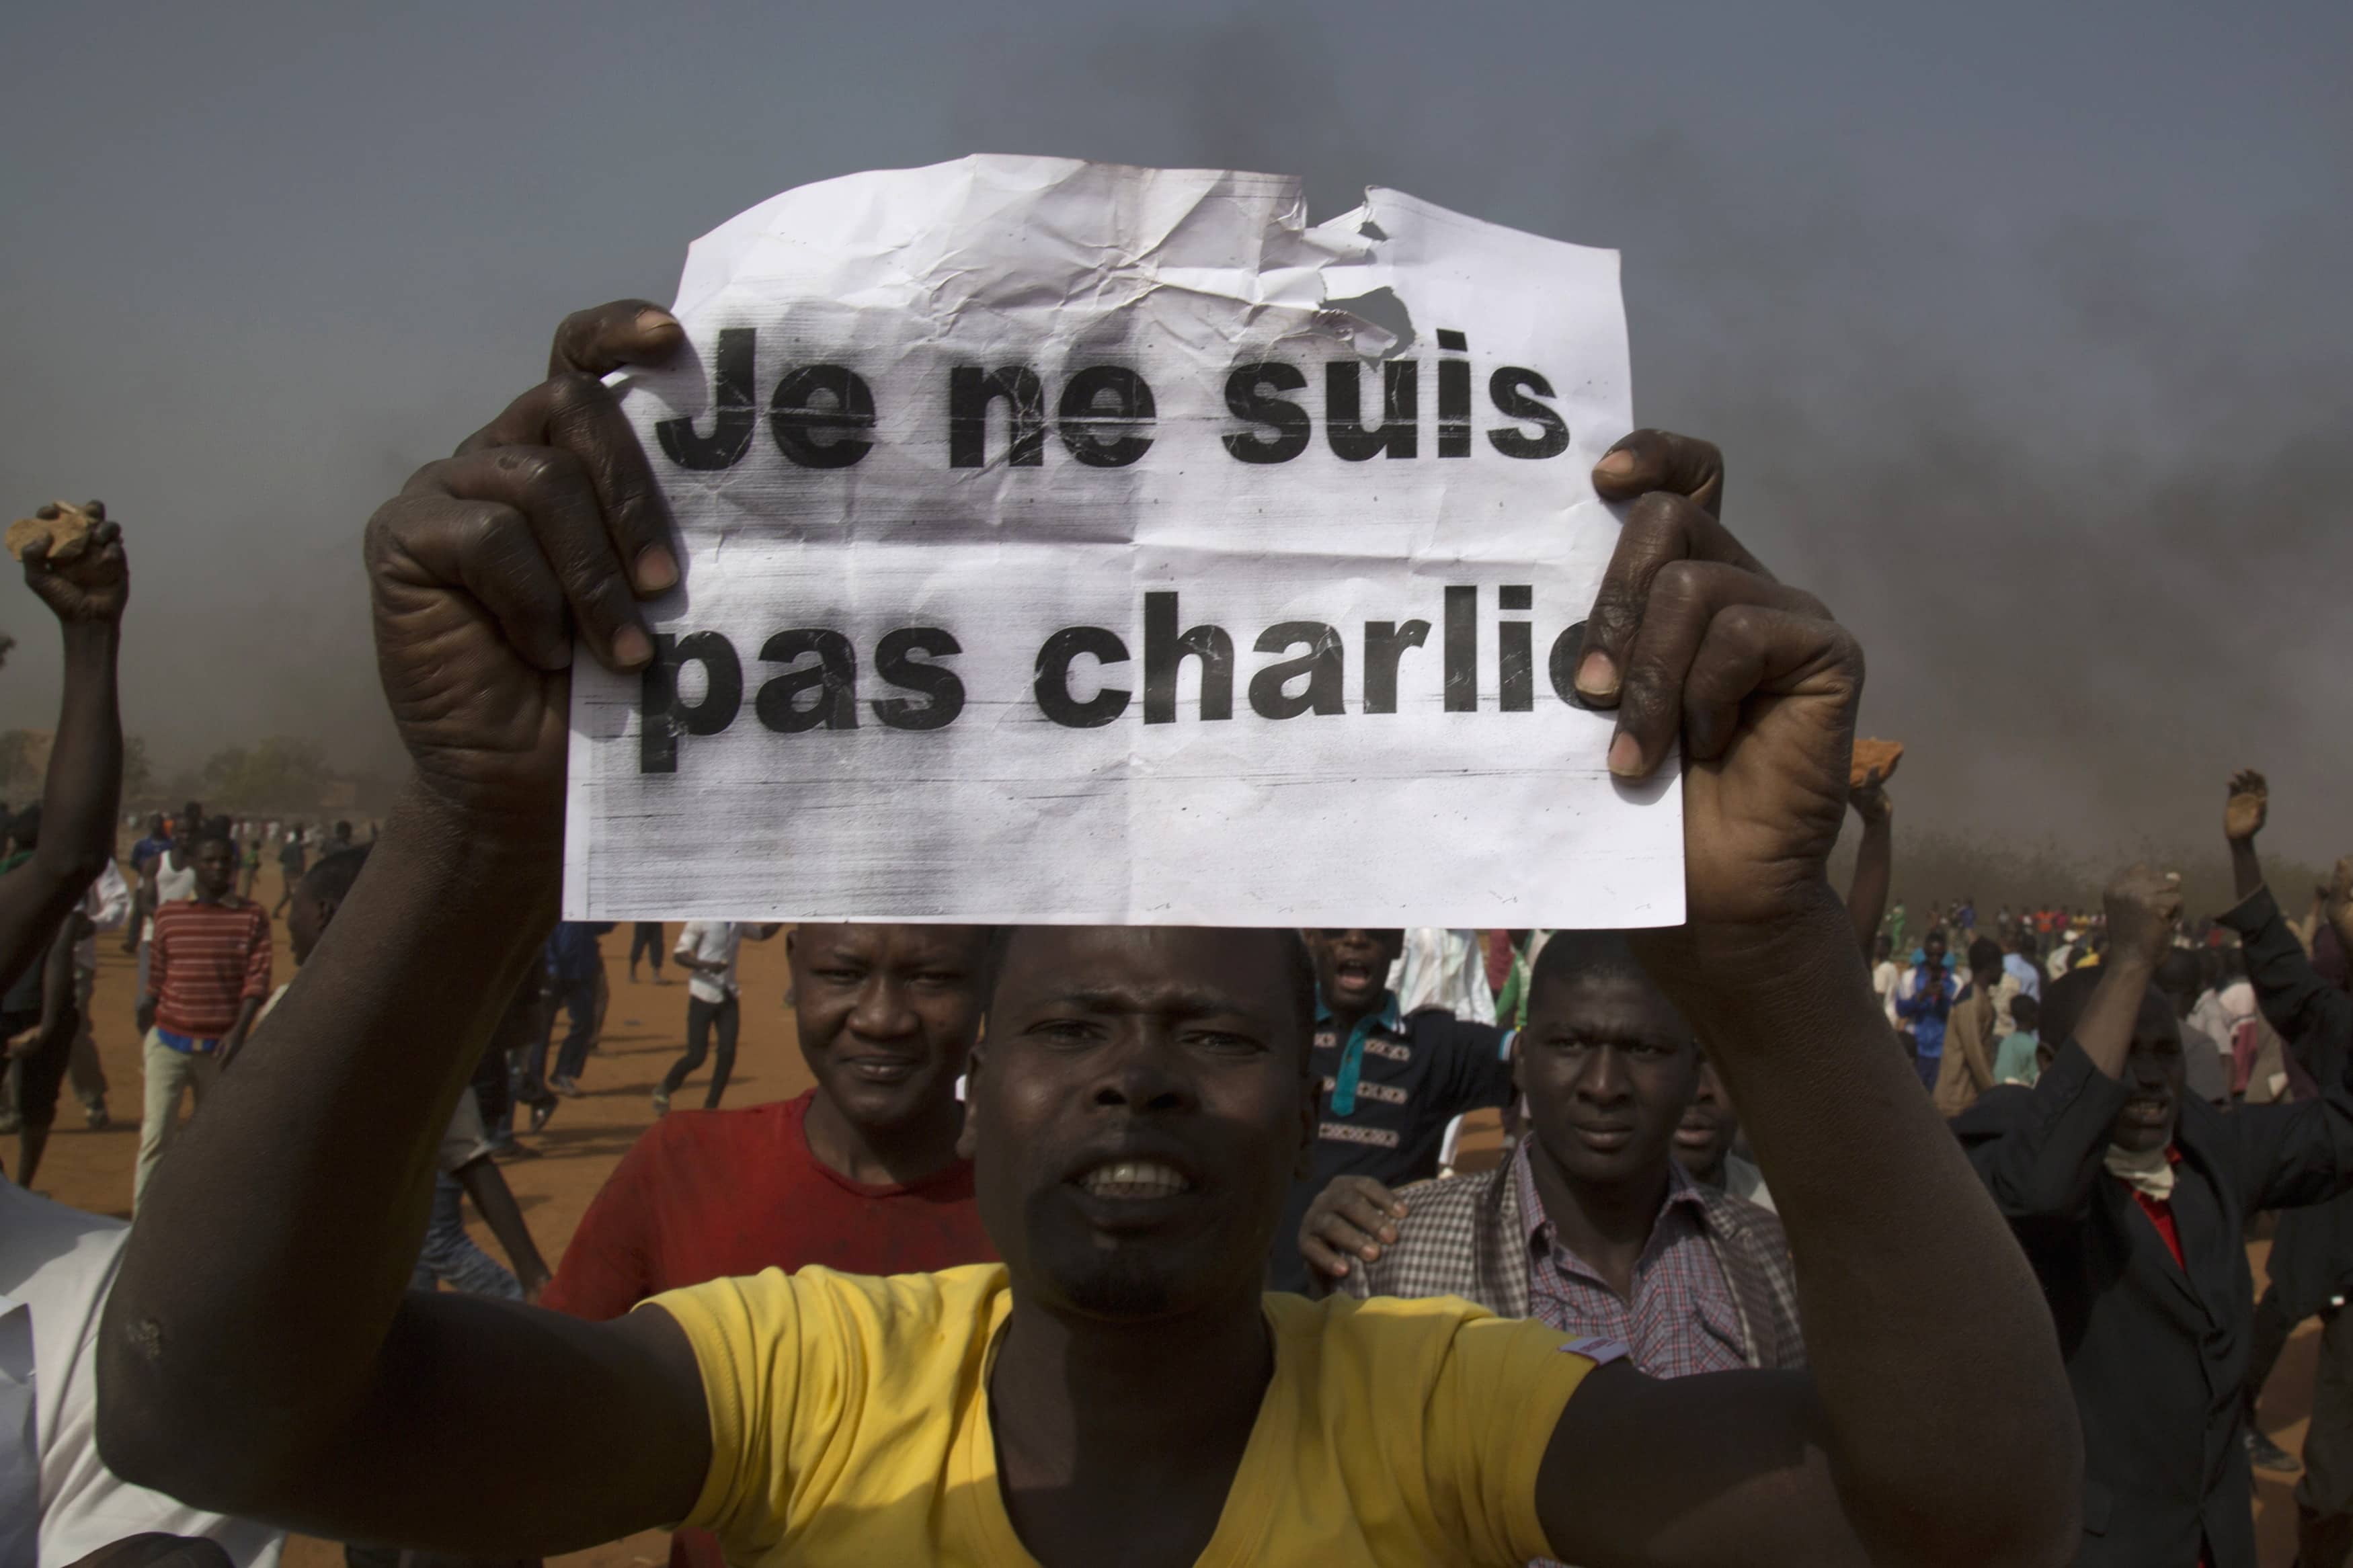 A man holds a sign during a protest against Niger President Mahamadou Issoufou's attendance at a Paris rally in support of Charlie Hebdo, Niamey, 17 January 2015, REUTERS/Tagaza Djibo